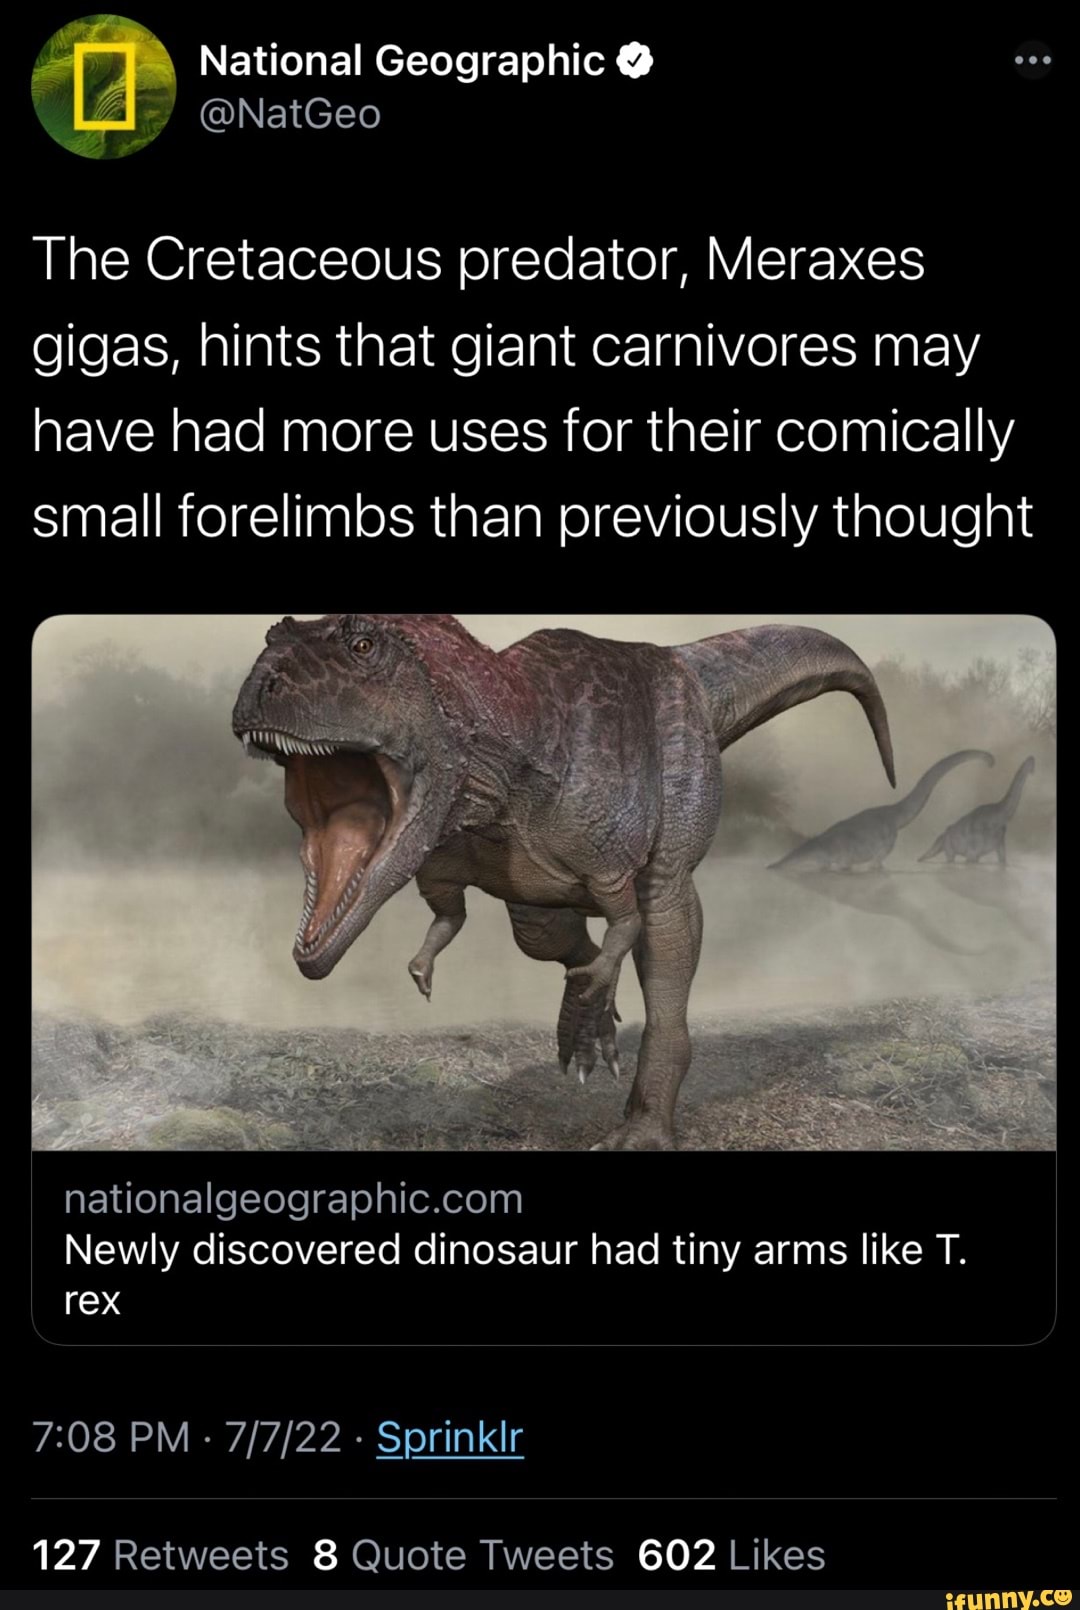 Newly discovered dinosaur had tiny arms like T. rex